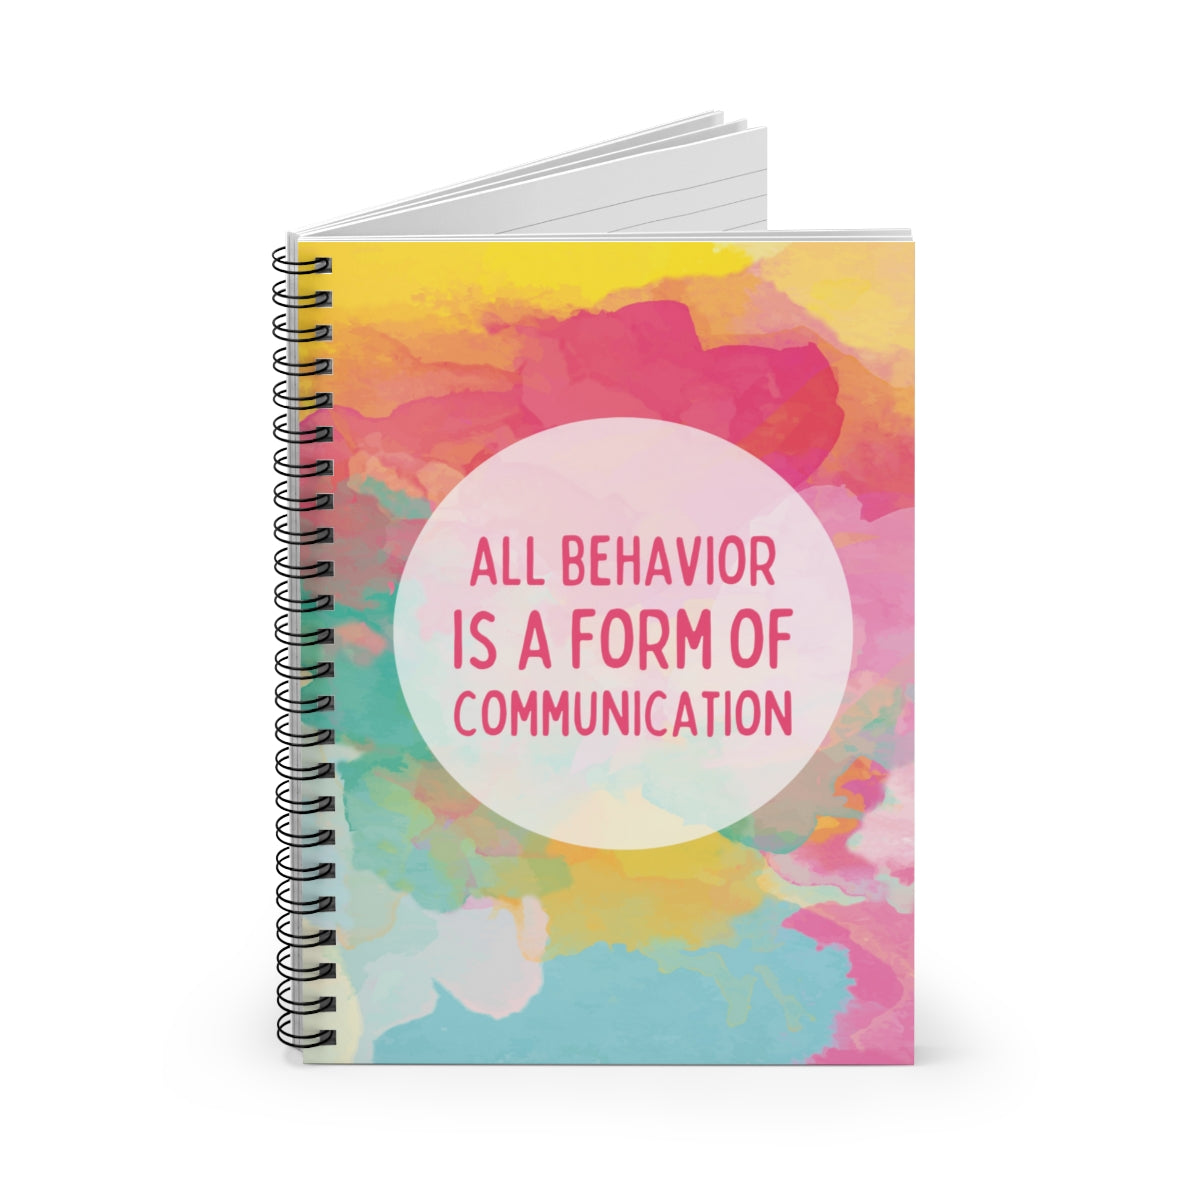 All Behavior is a Form of Communication Notebook - Ruled Line